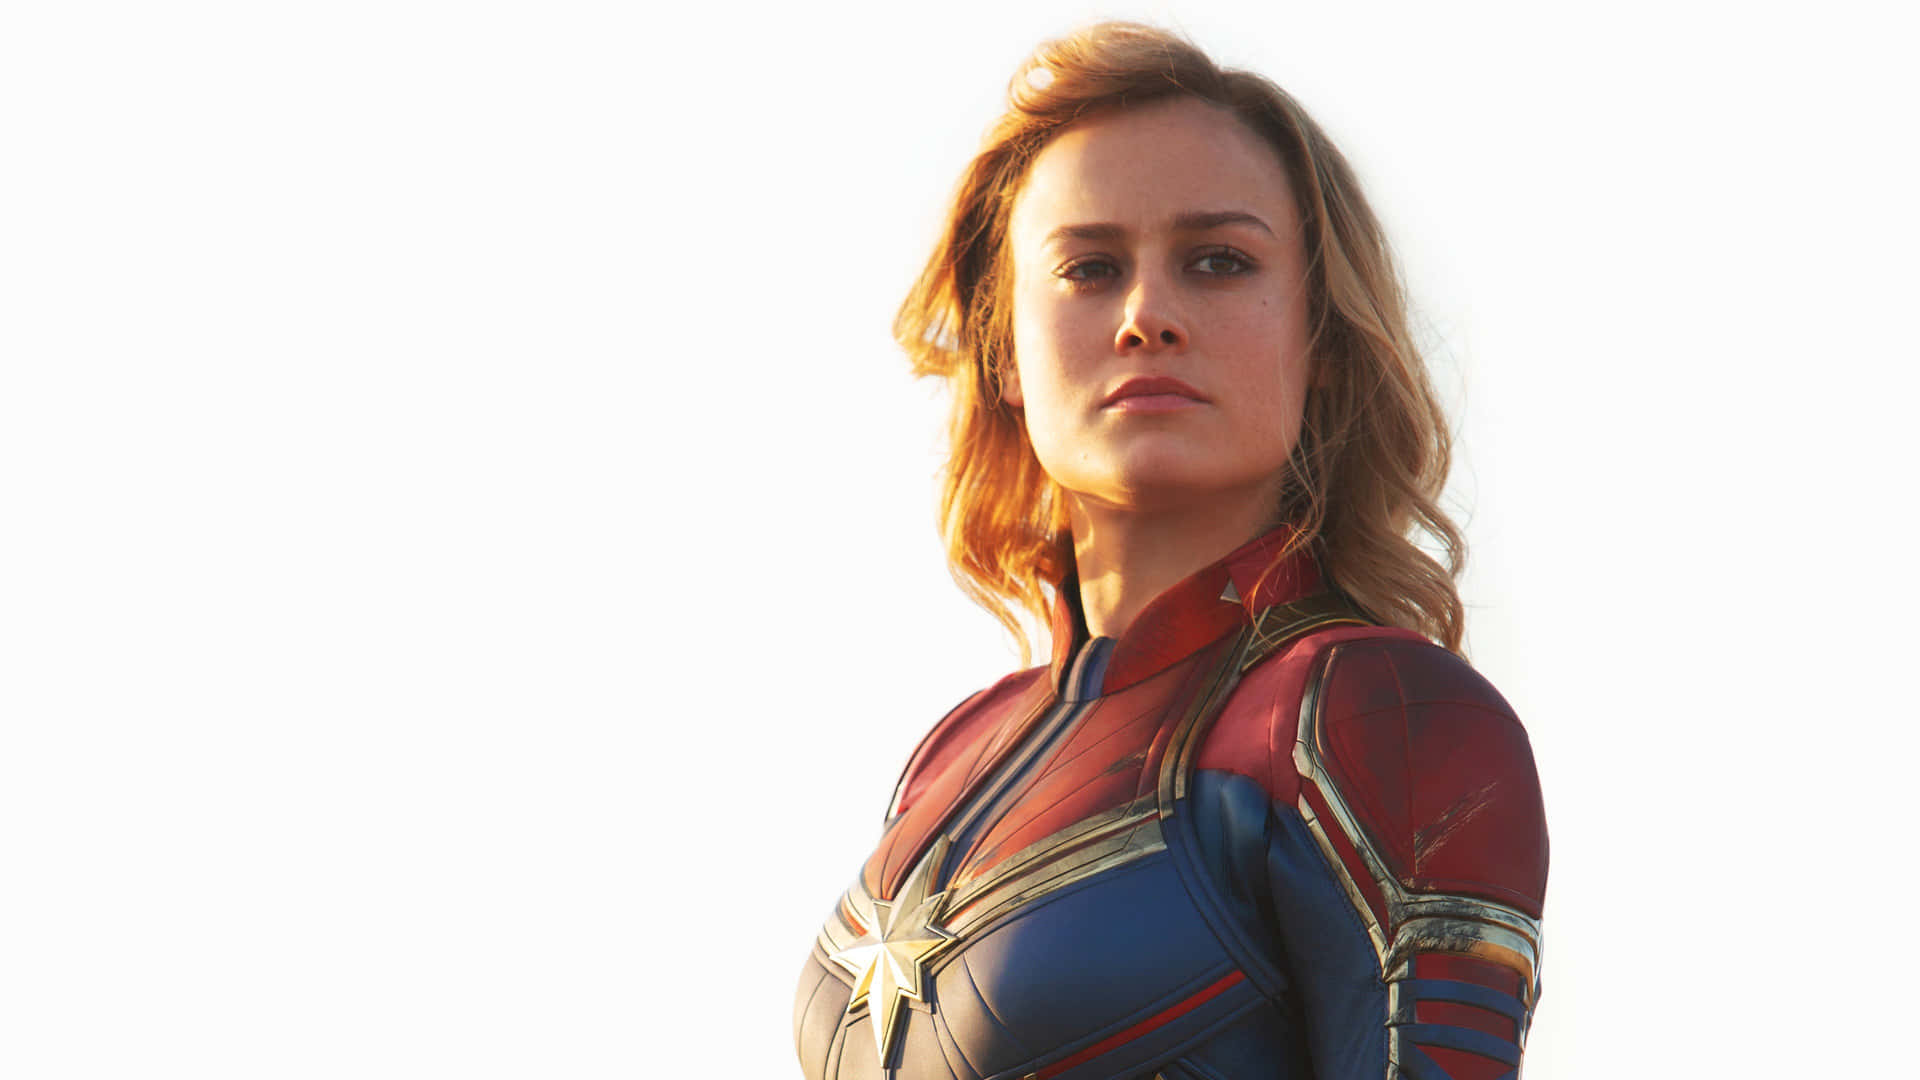 Showing the power of Captain Marvel and Carol Danvers Wallpaper